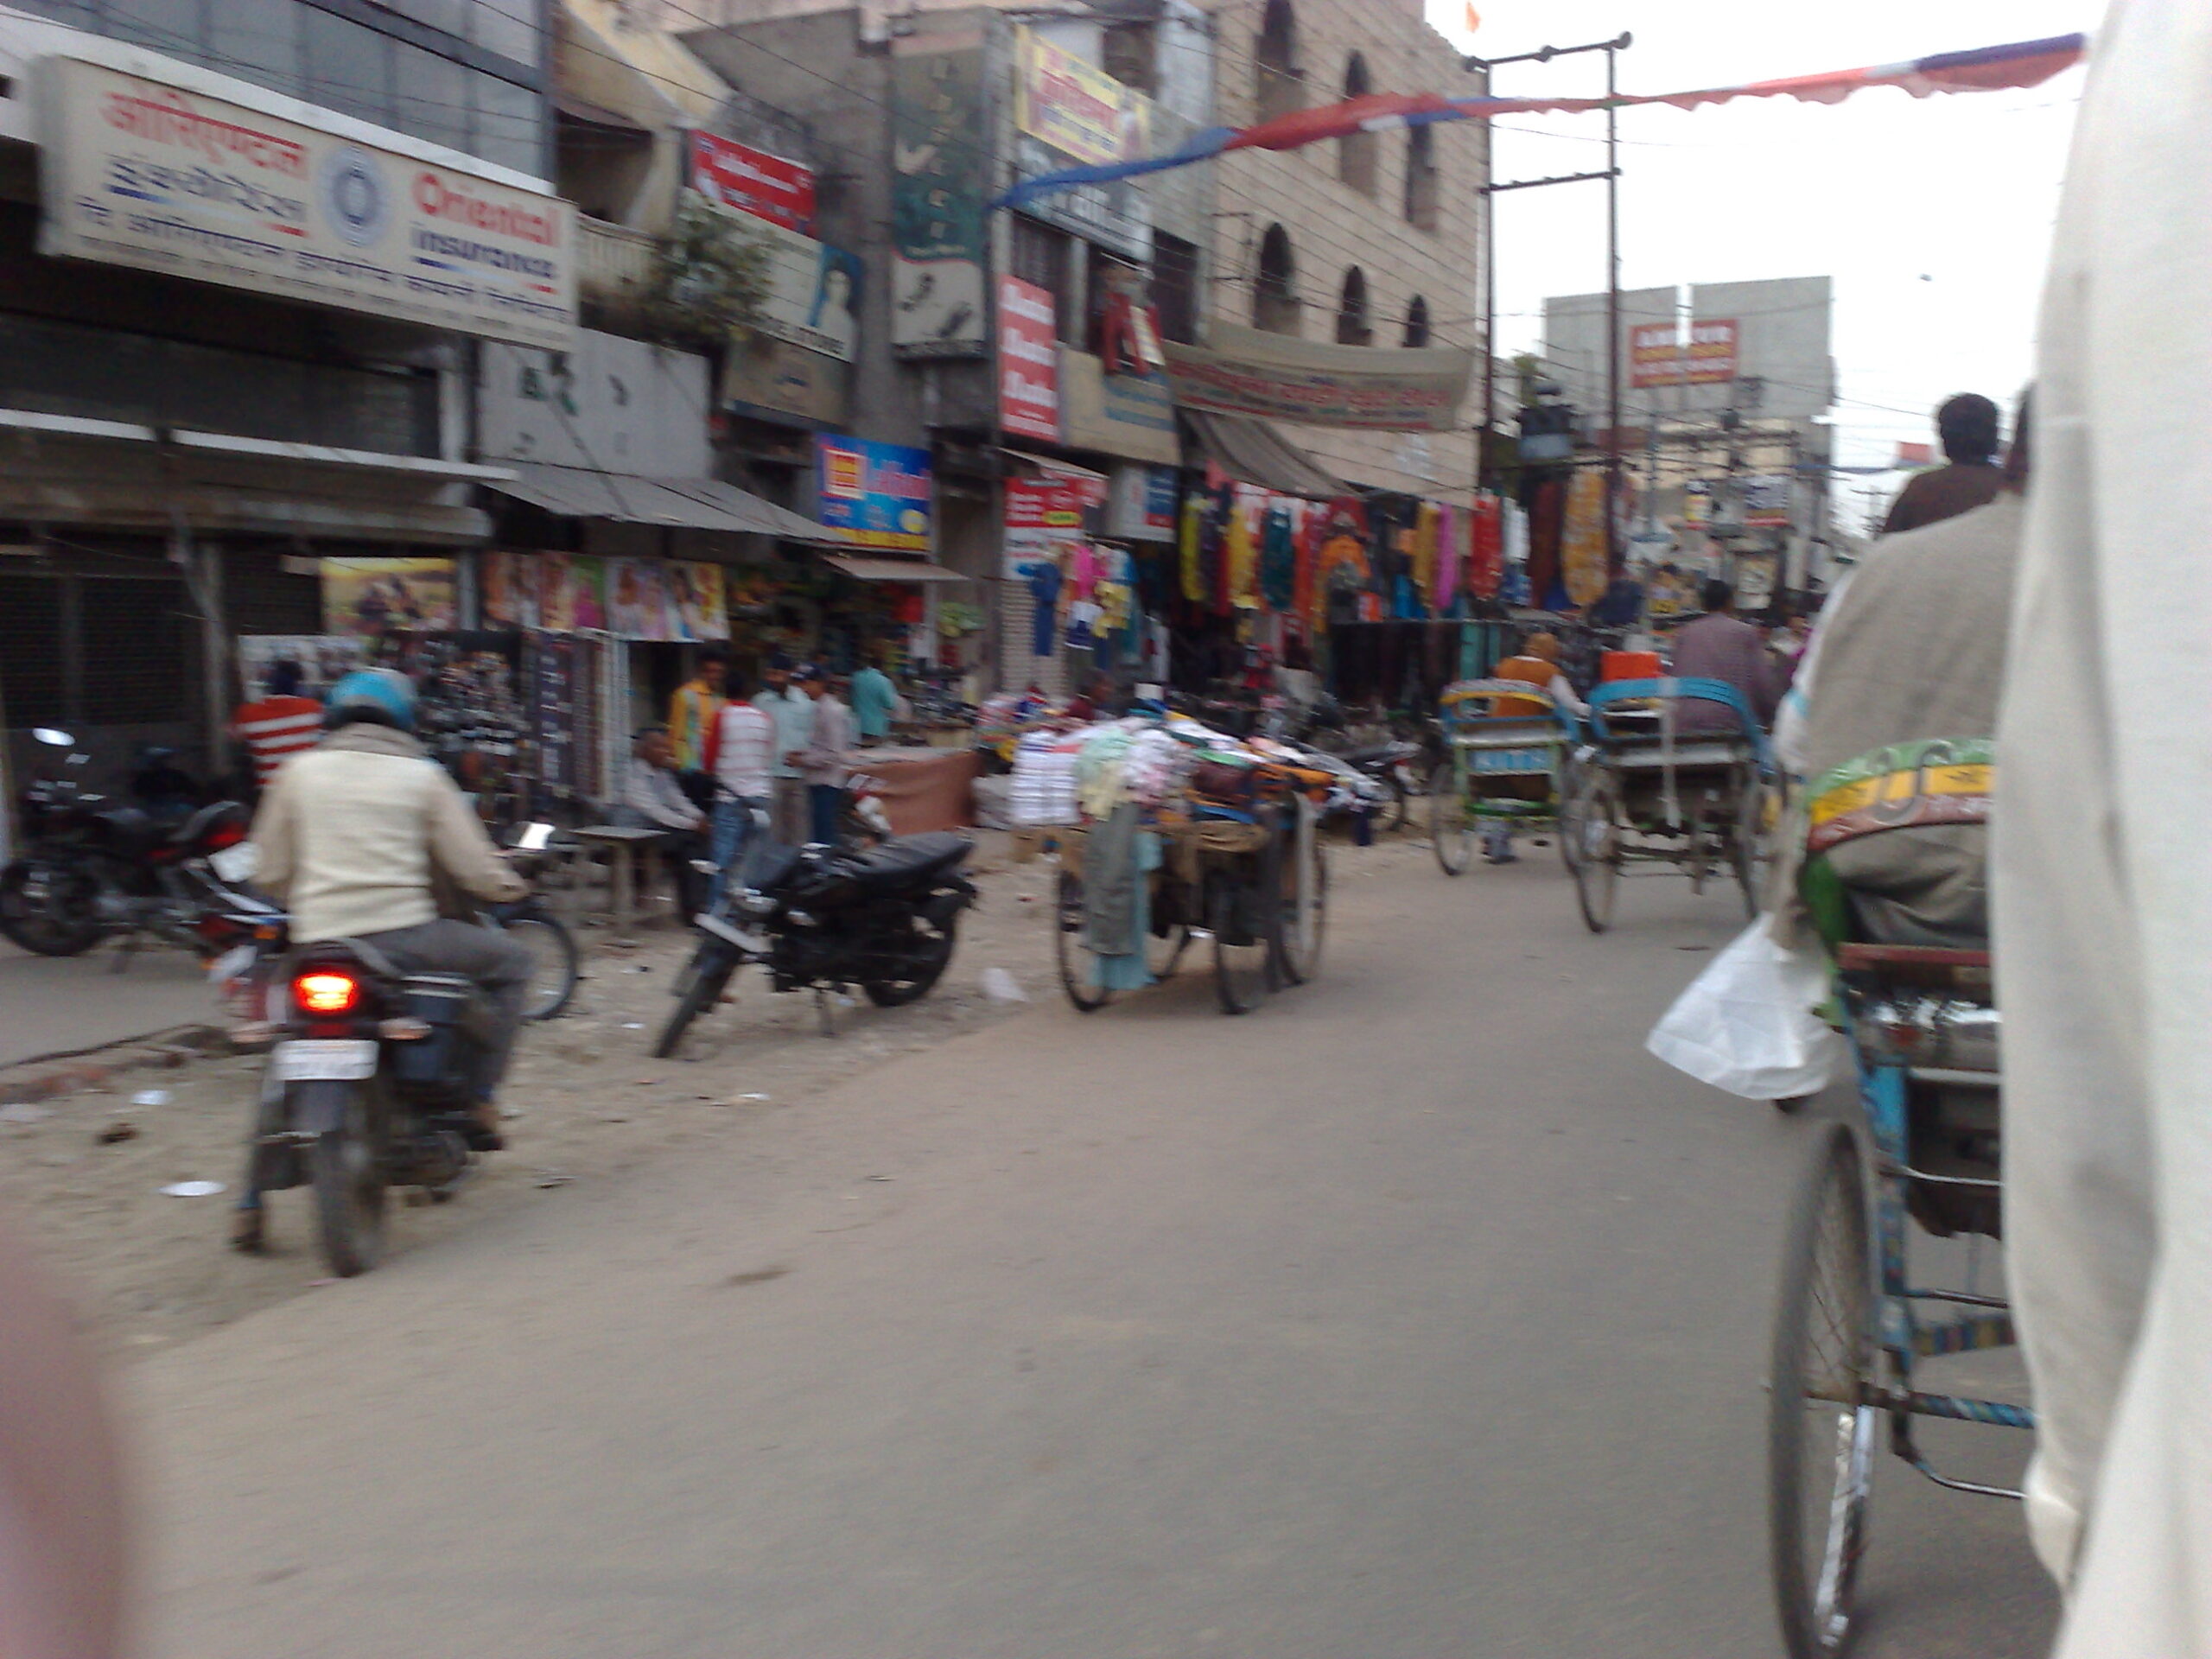 After Many Years Visited My Childhood City & Home : Saharanpur, India (Feb'09) 4